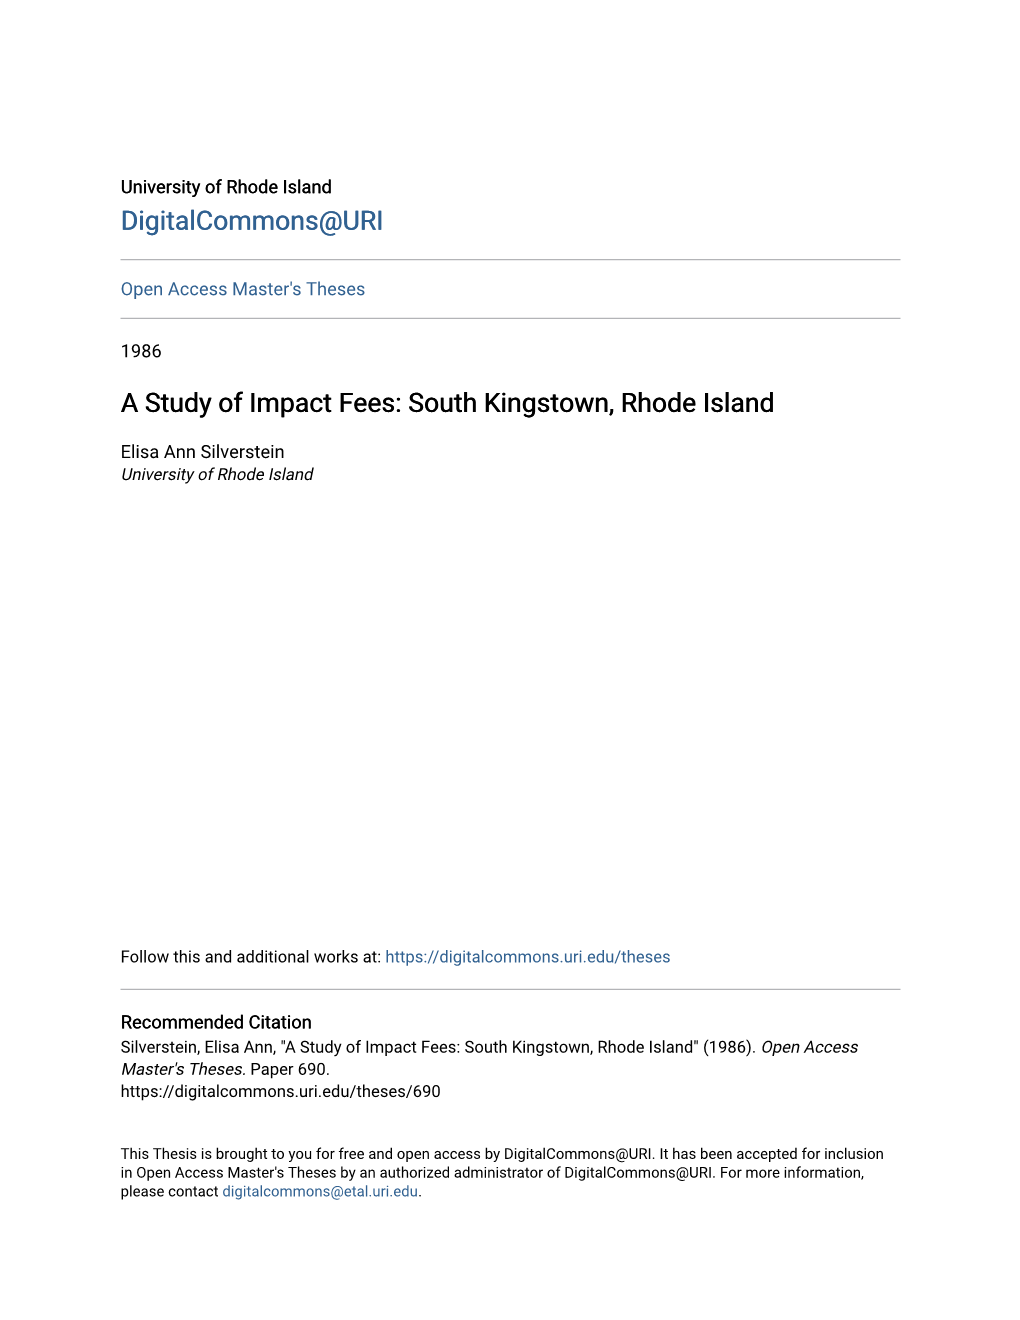 A Study of Impact Fees: South Kingstown, Rhode Island